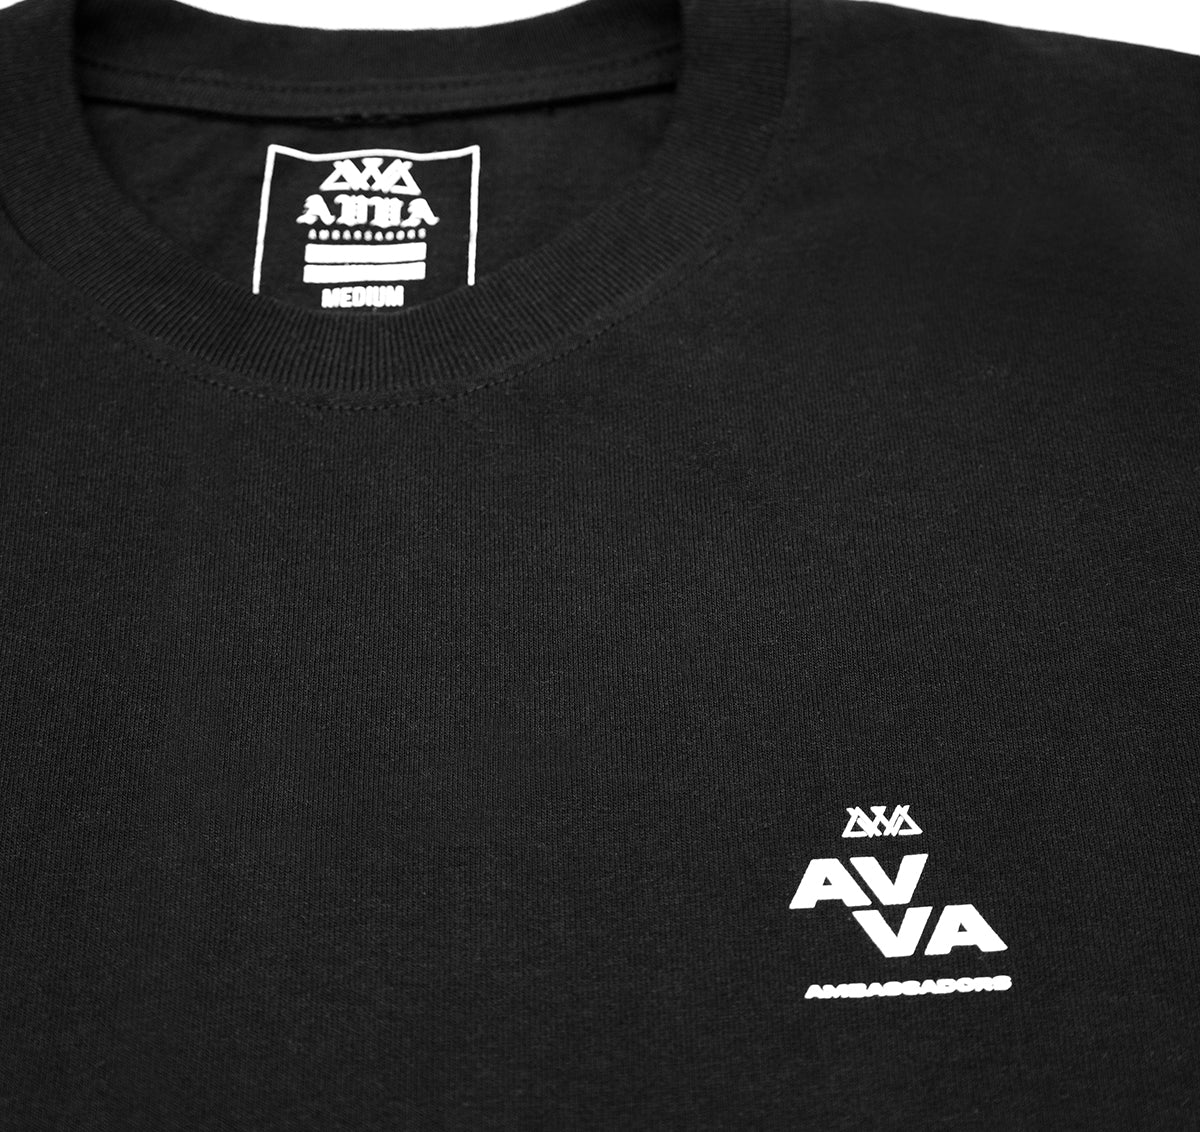 CLOSE UP OF TOP RIGHT SMALL AVVA LOGO ON THE FRONT OF THE TEE.